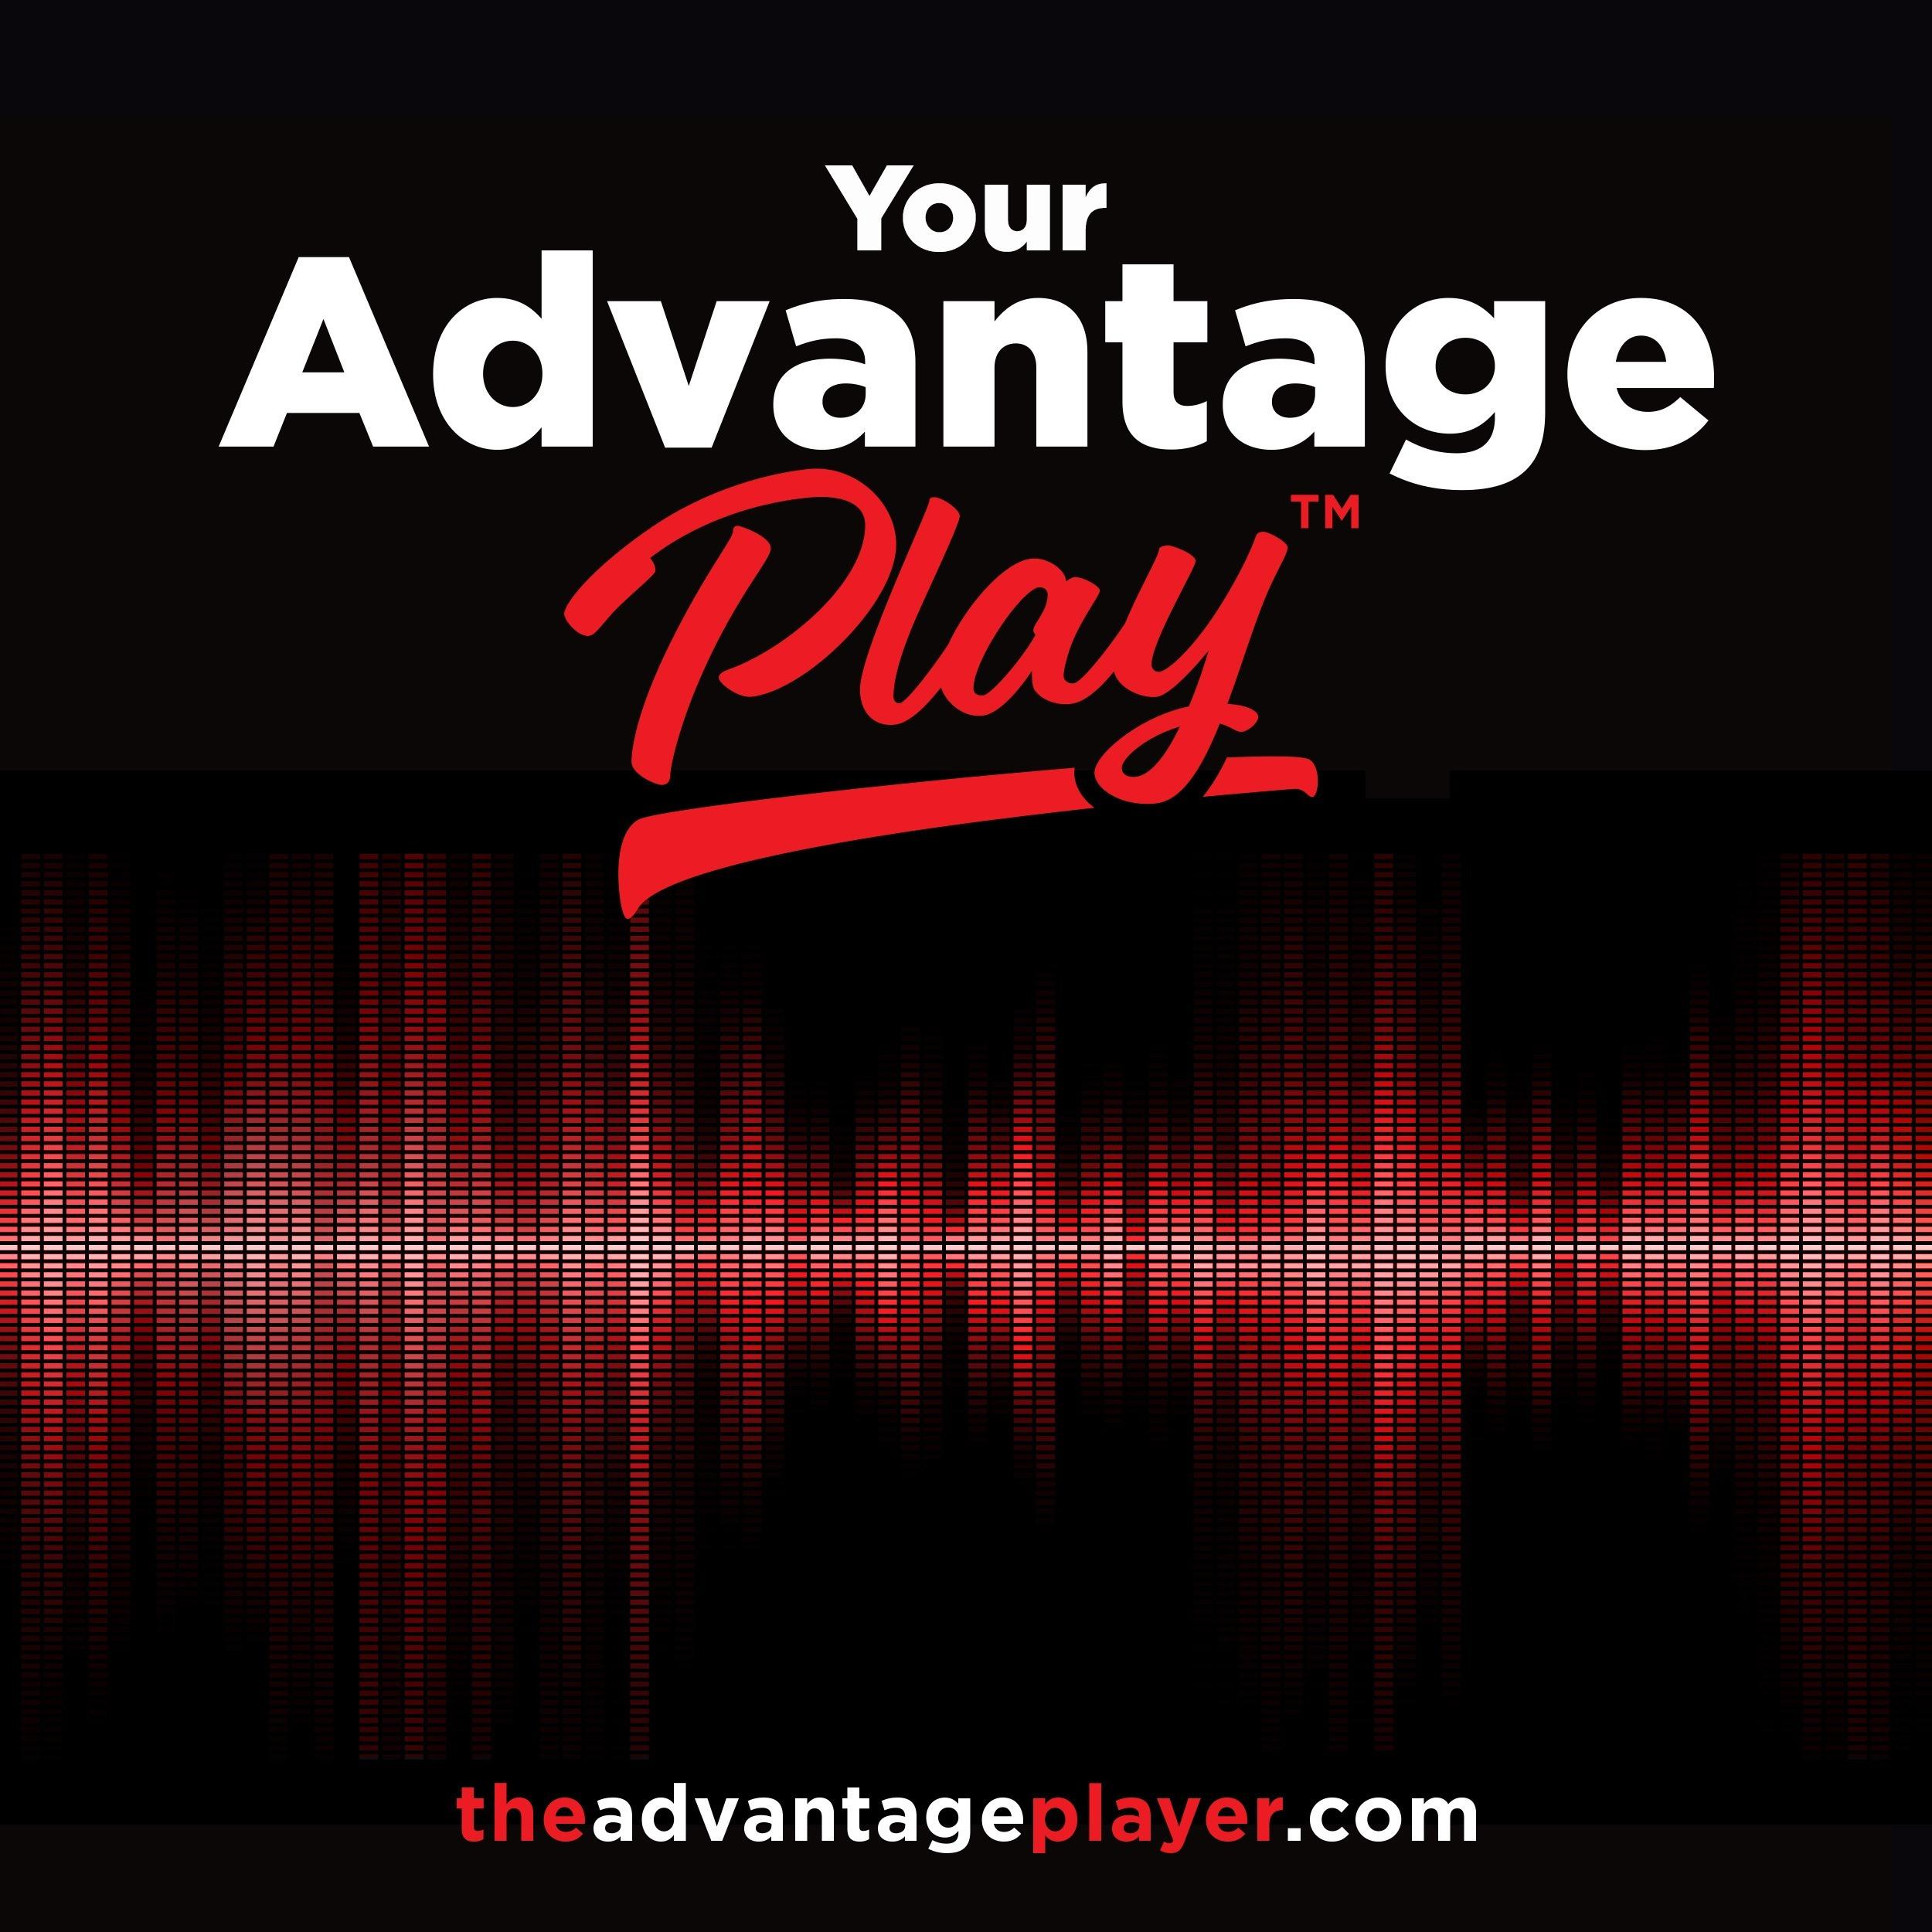 Your Advantage Play™